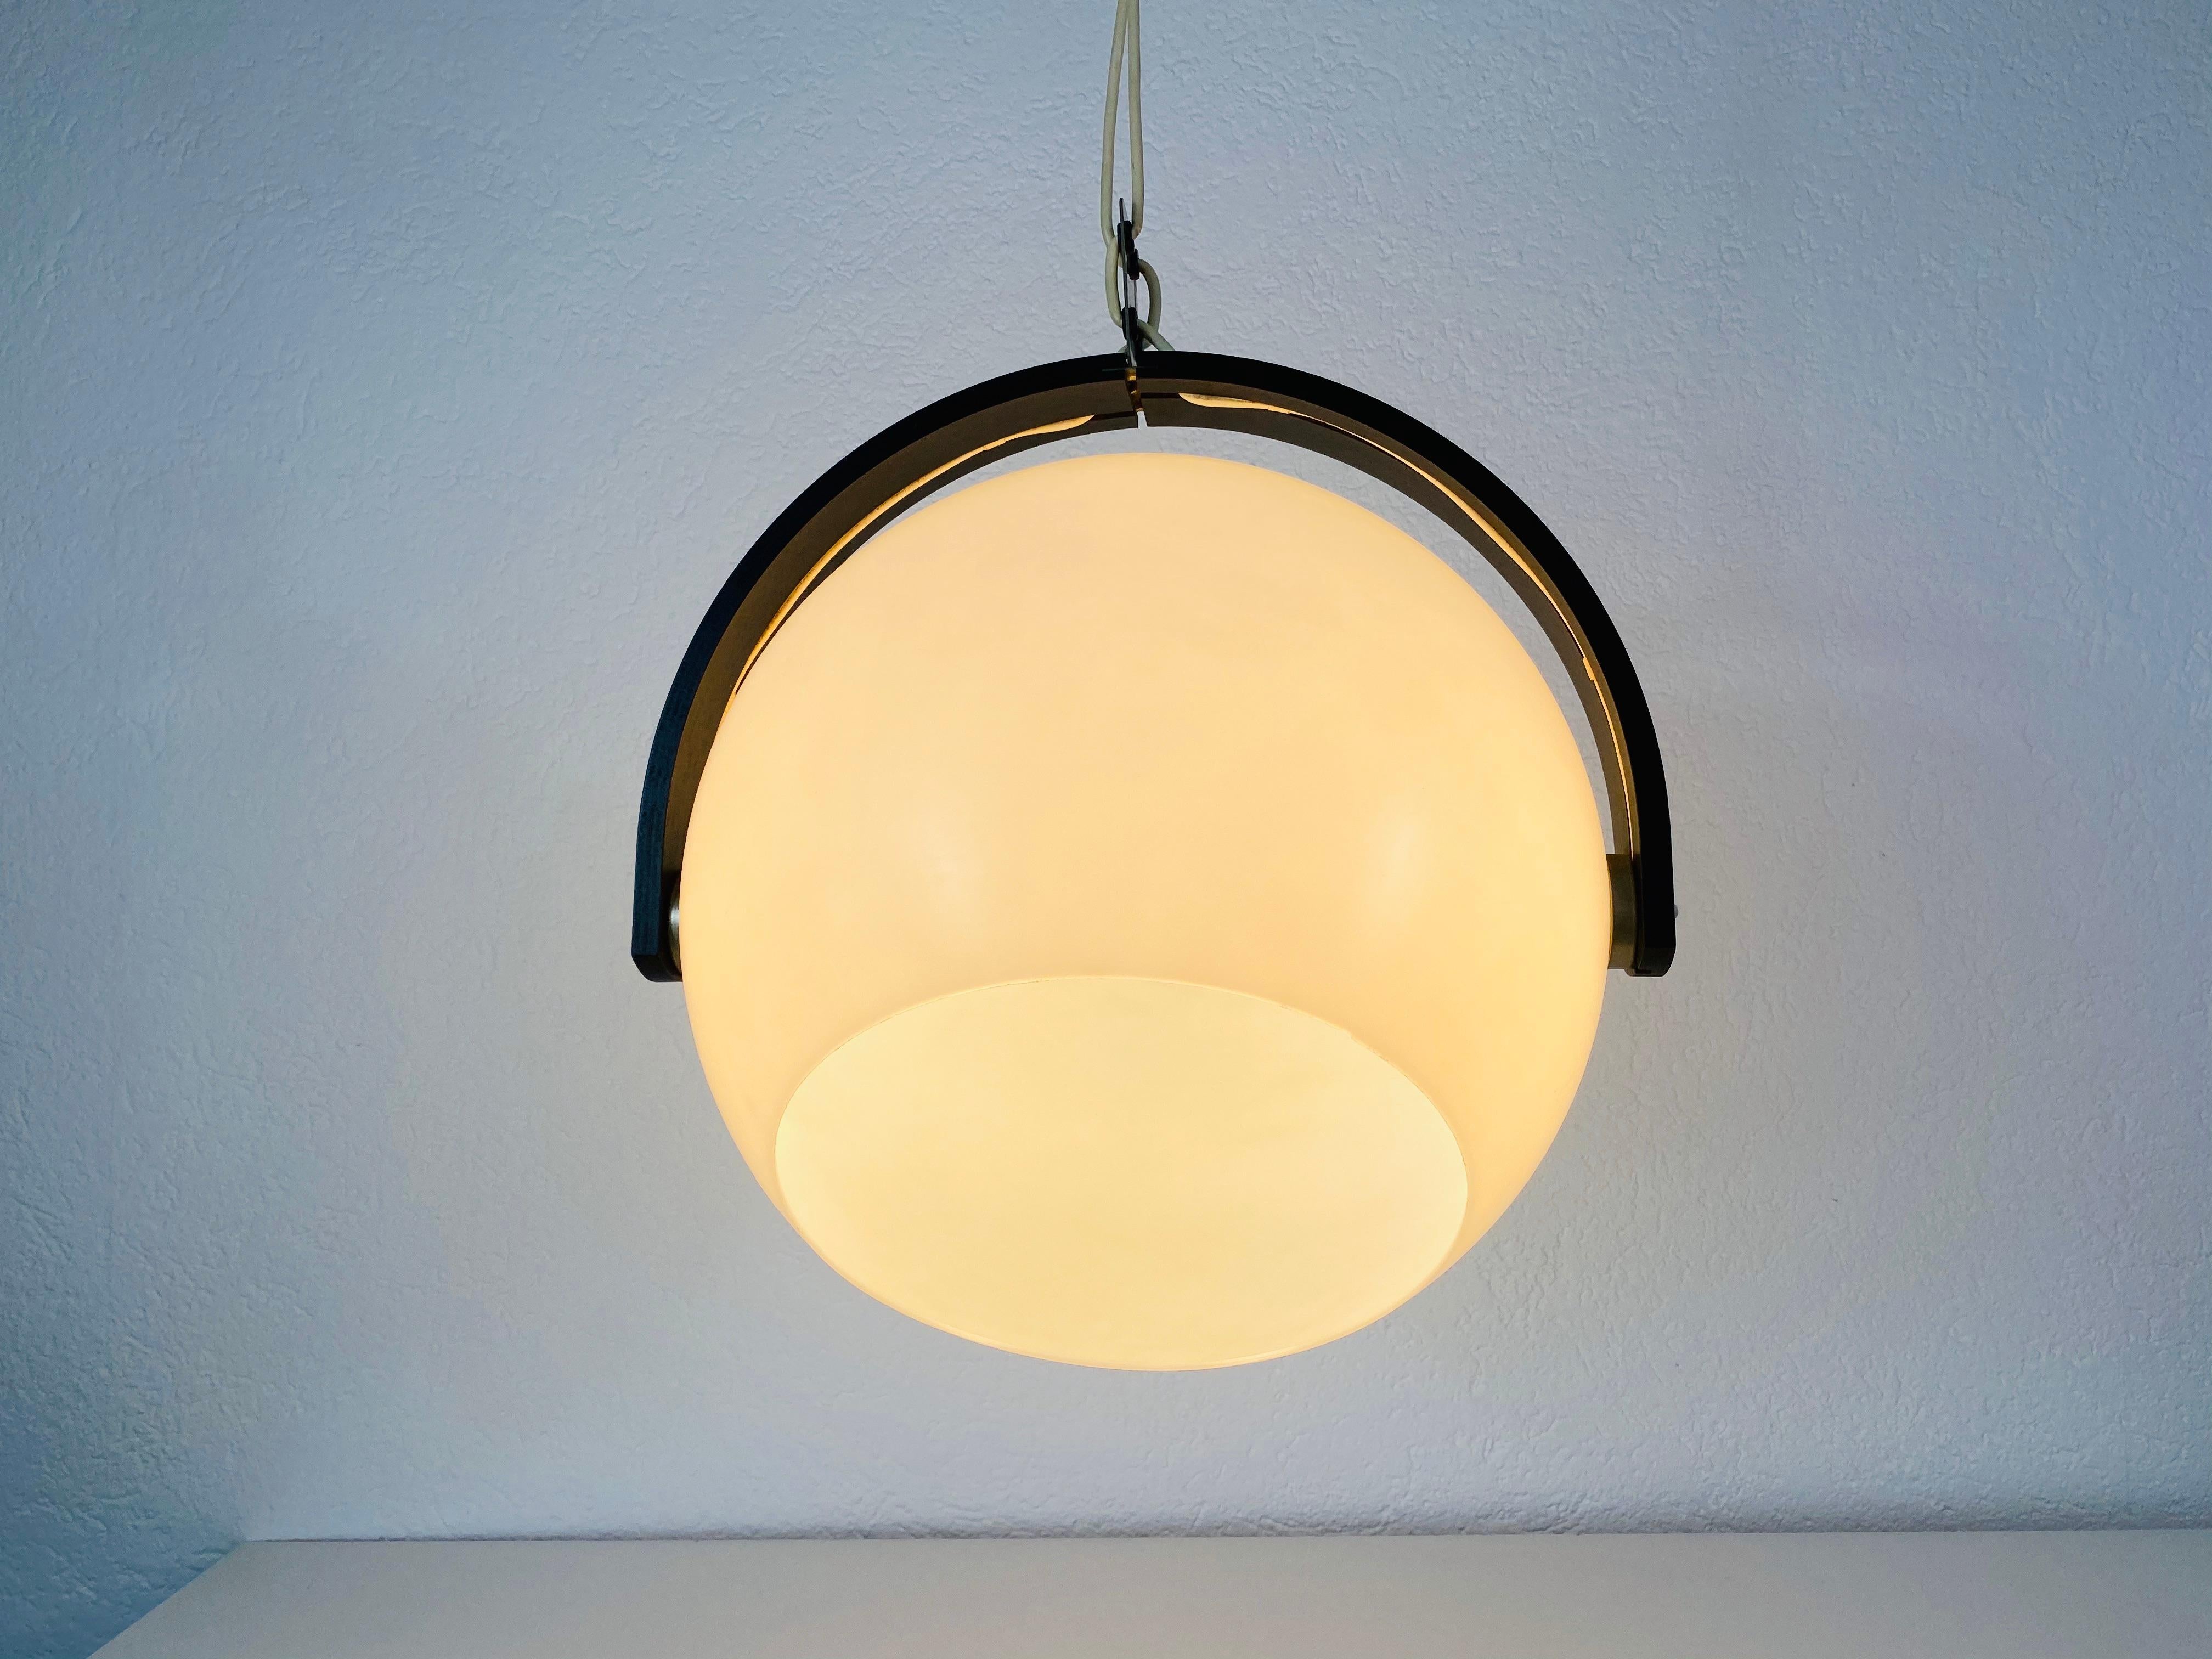 Black Wood and White Plastic Pendant Lamp by Temde, 1970s For Sale 1